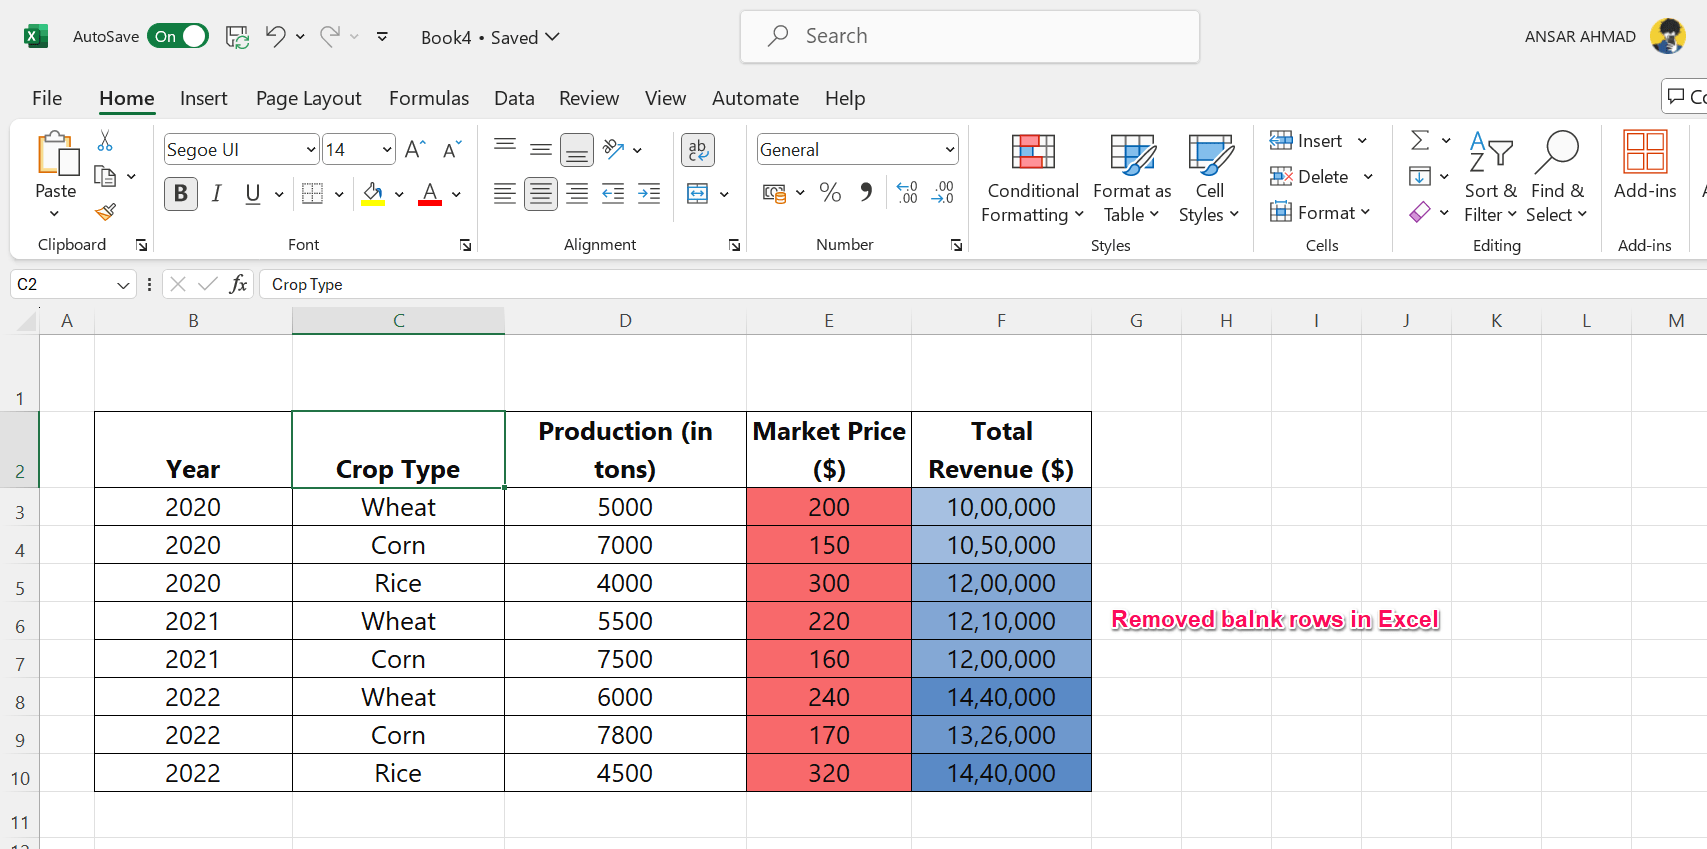 Removed empty rows in Excel